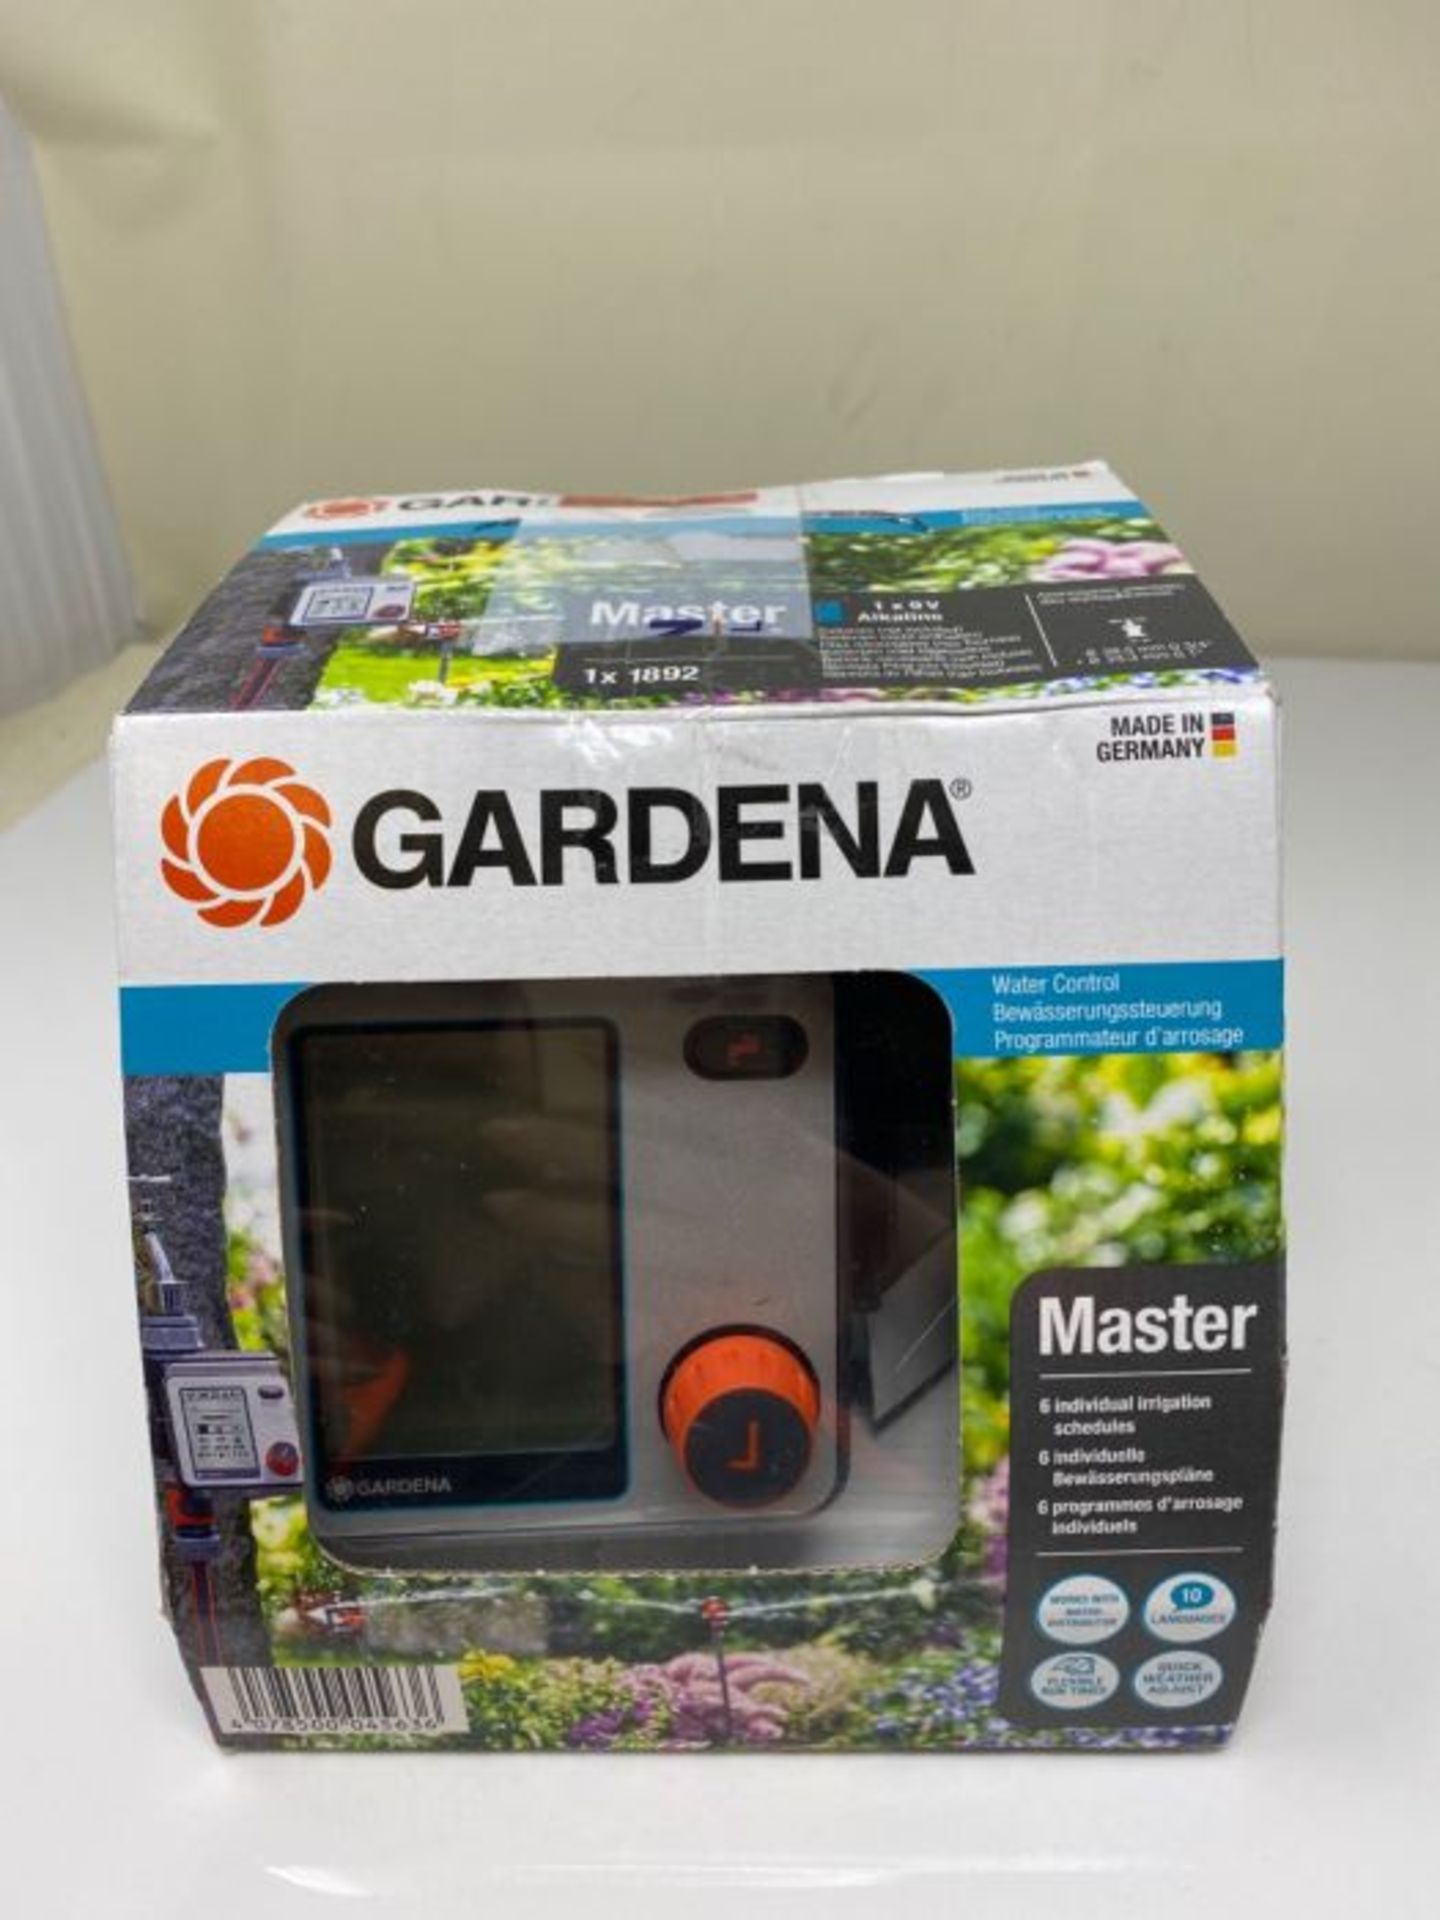 RRP £64.00 Gardena Watering Control Master: And Time-Saving Watering, 6 Schedules, LCD Display, W - Image 2 of 3